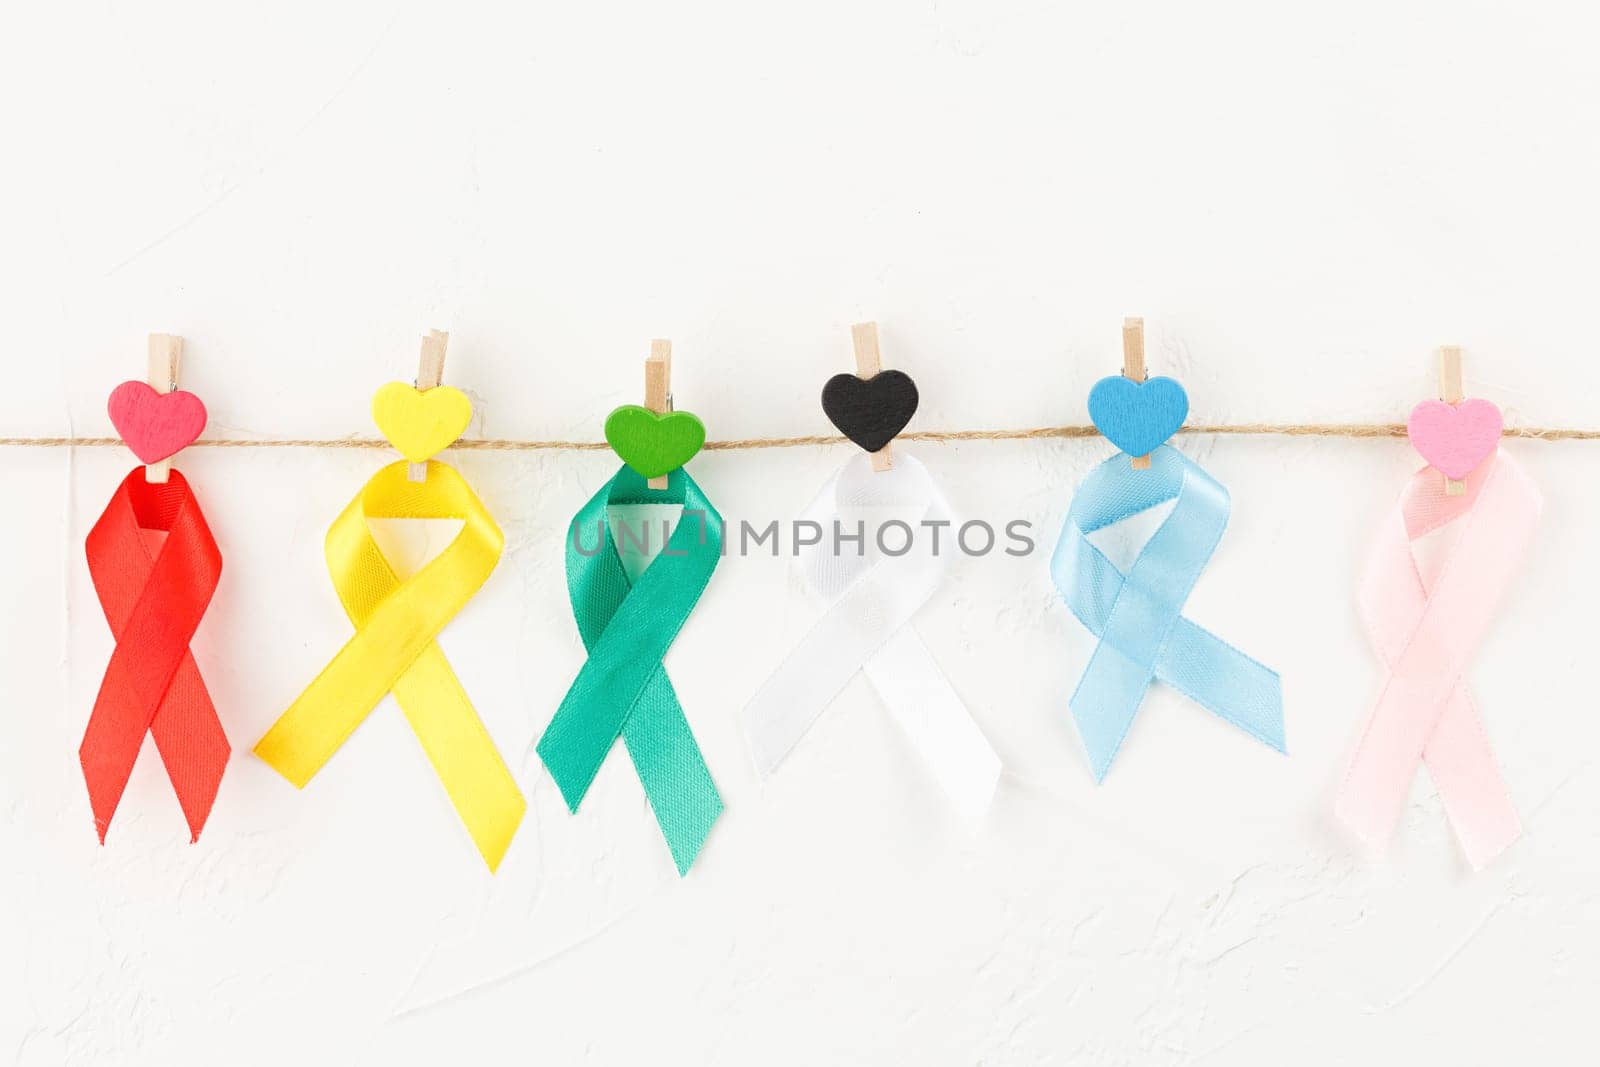 Colored cancer ribbons on clothespins. by alexxndr